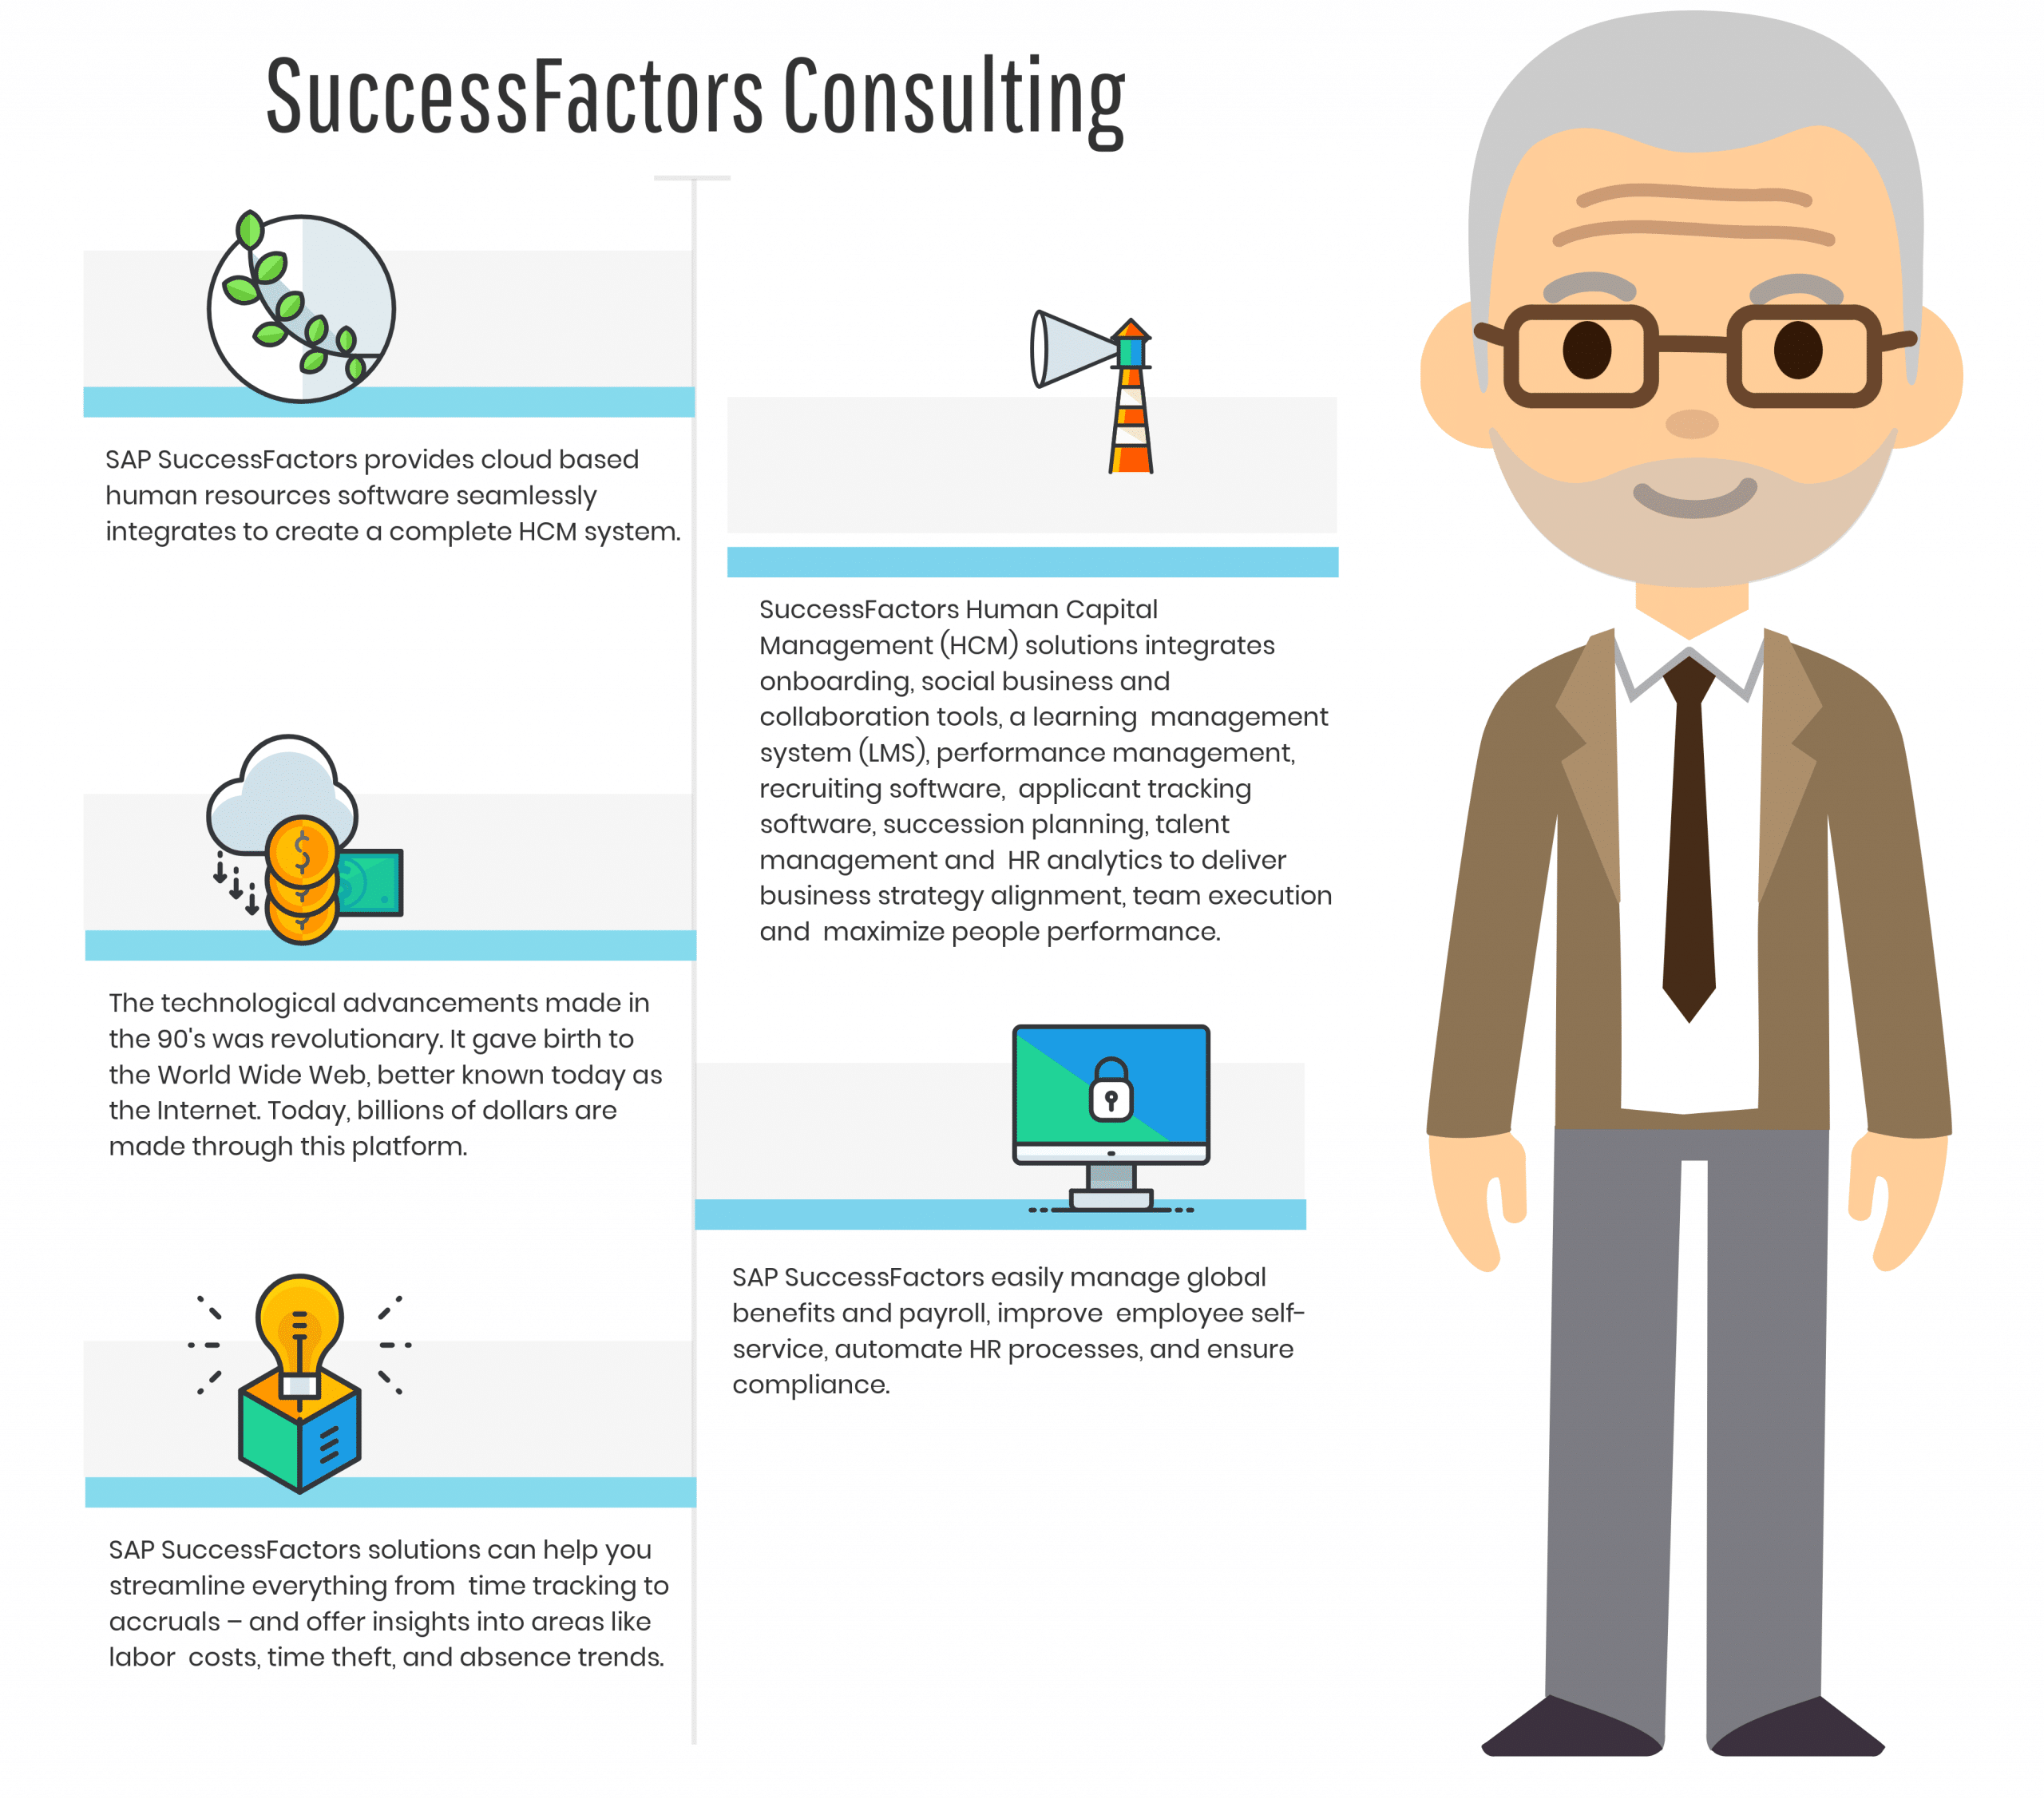 How To Use SuccessFactors To Increase Your Company’s Marketing ROI